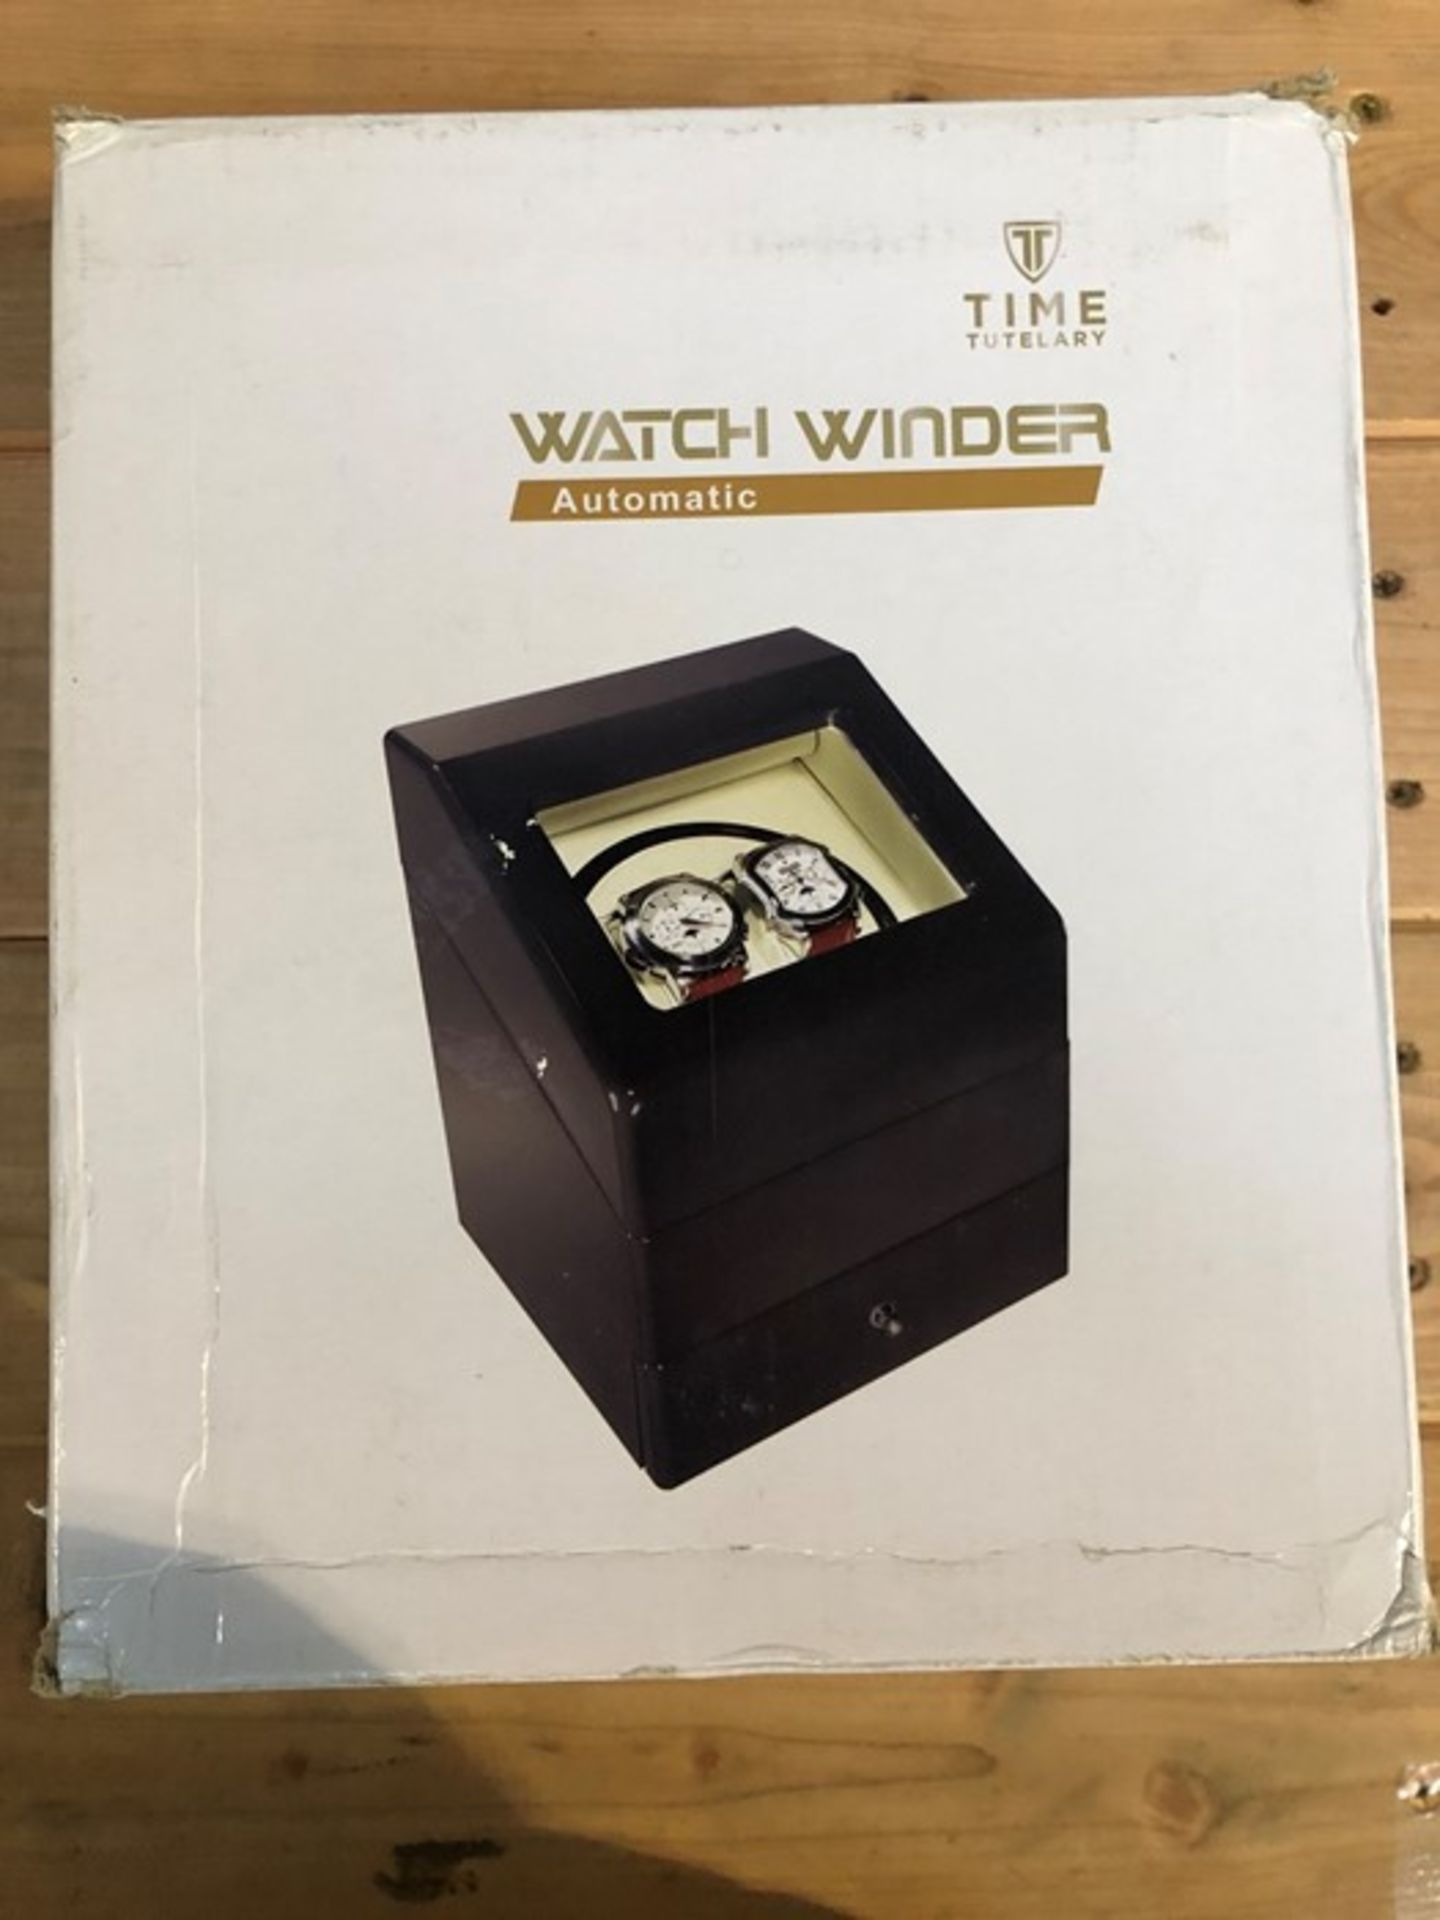 1 BOXED TIME TUTELARY AUTOMATIC WATCH WINDER / RRP £38.00 (PUBLIC VIEWING AVAILABLE)